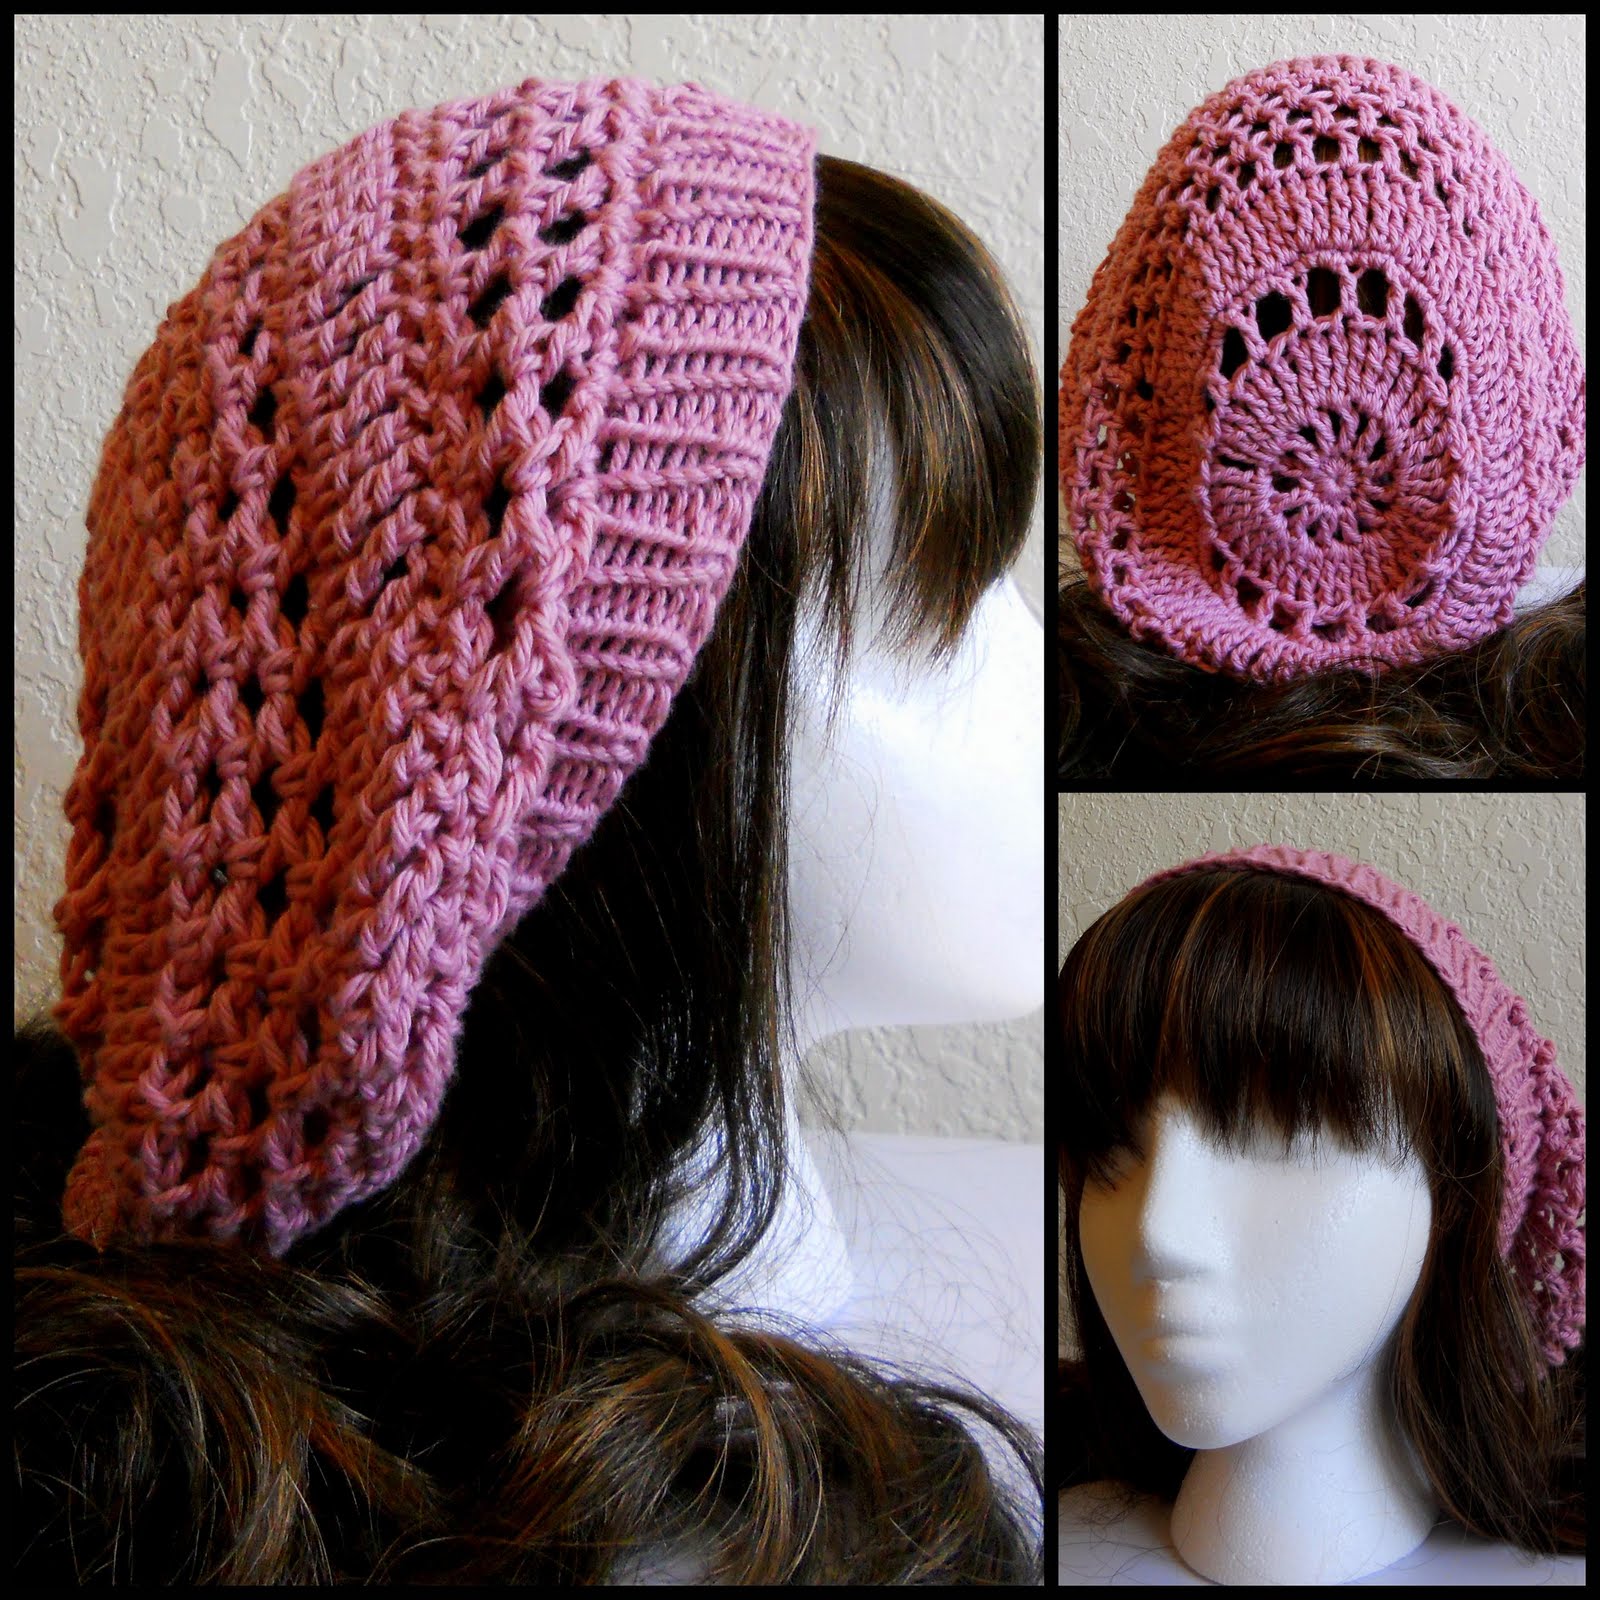 SHOP FOR CROCHET HATS ONLINE - COMPARE PRICES, READ REVIEWS AND